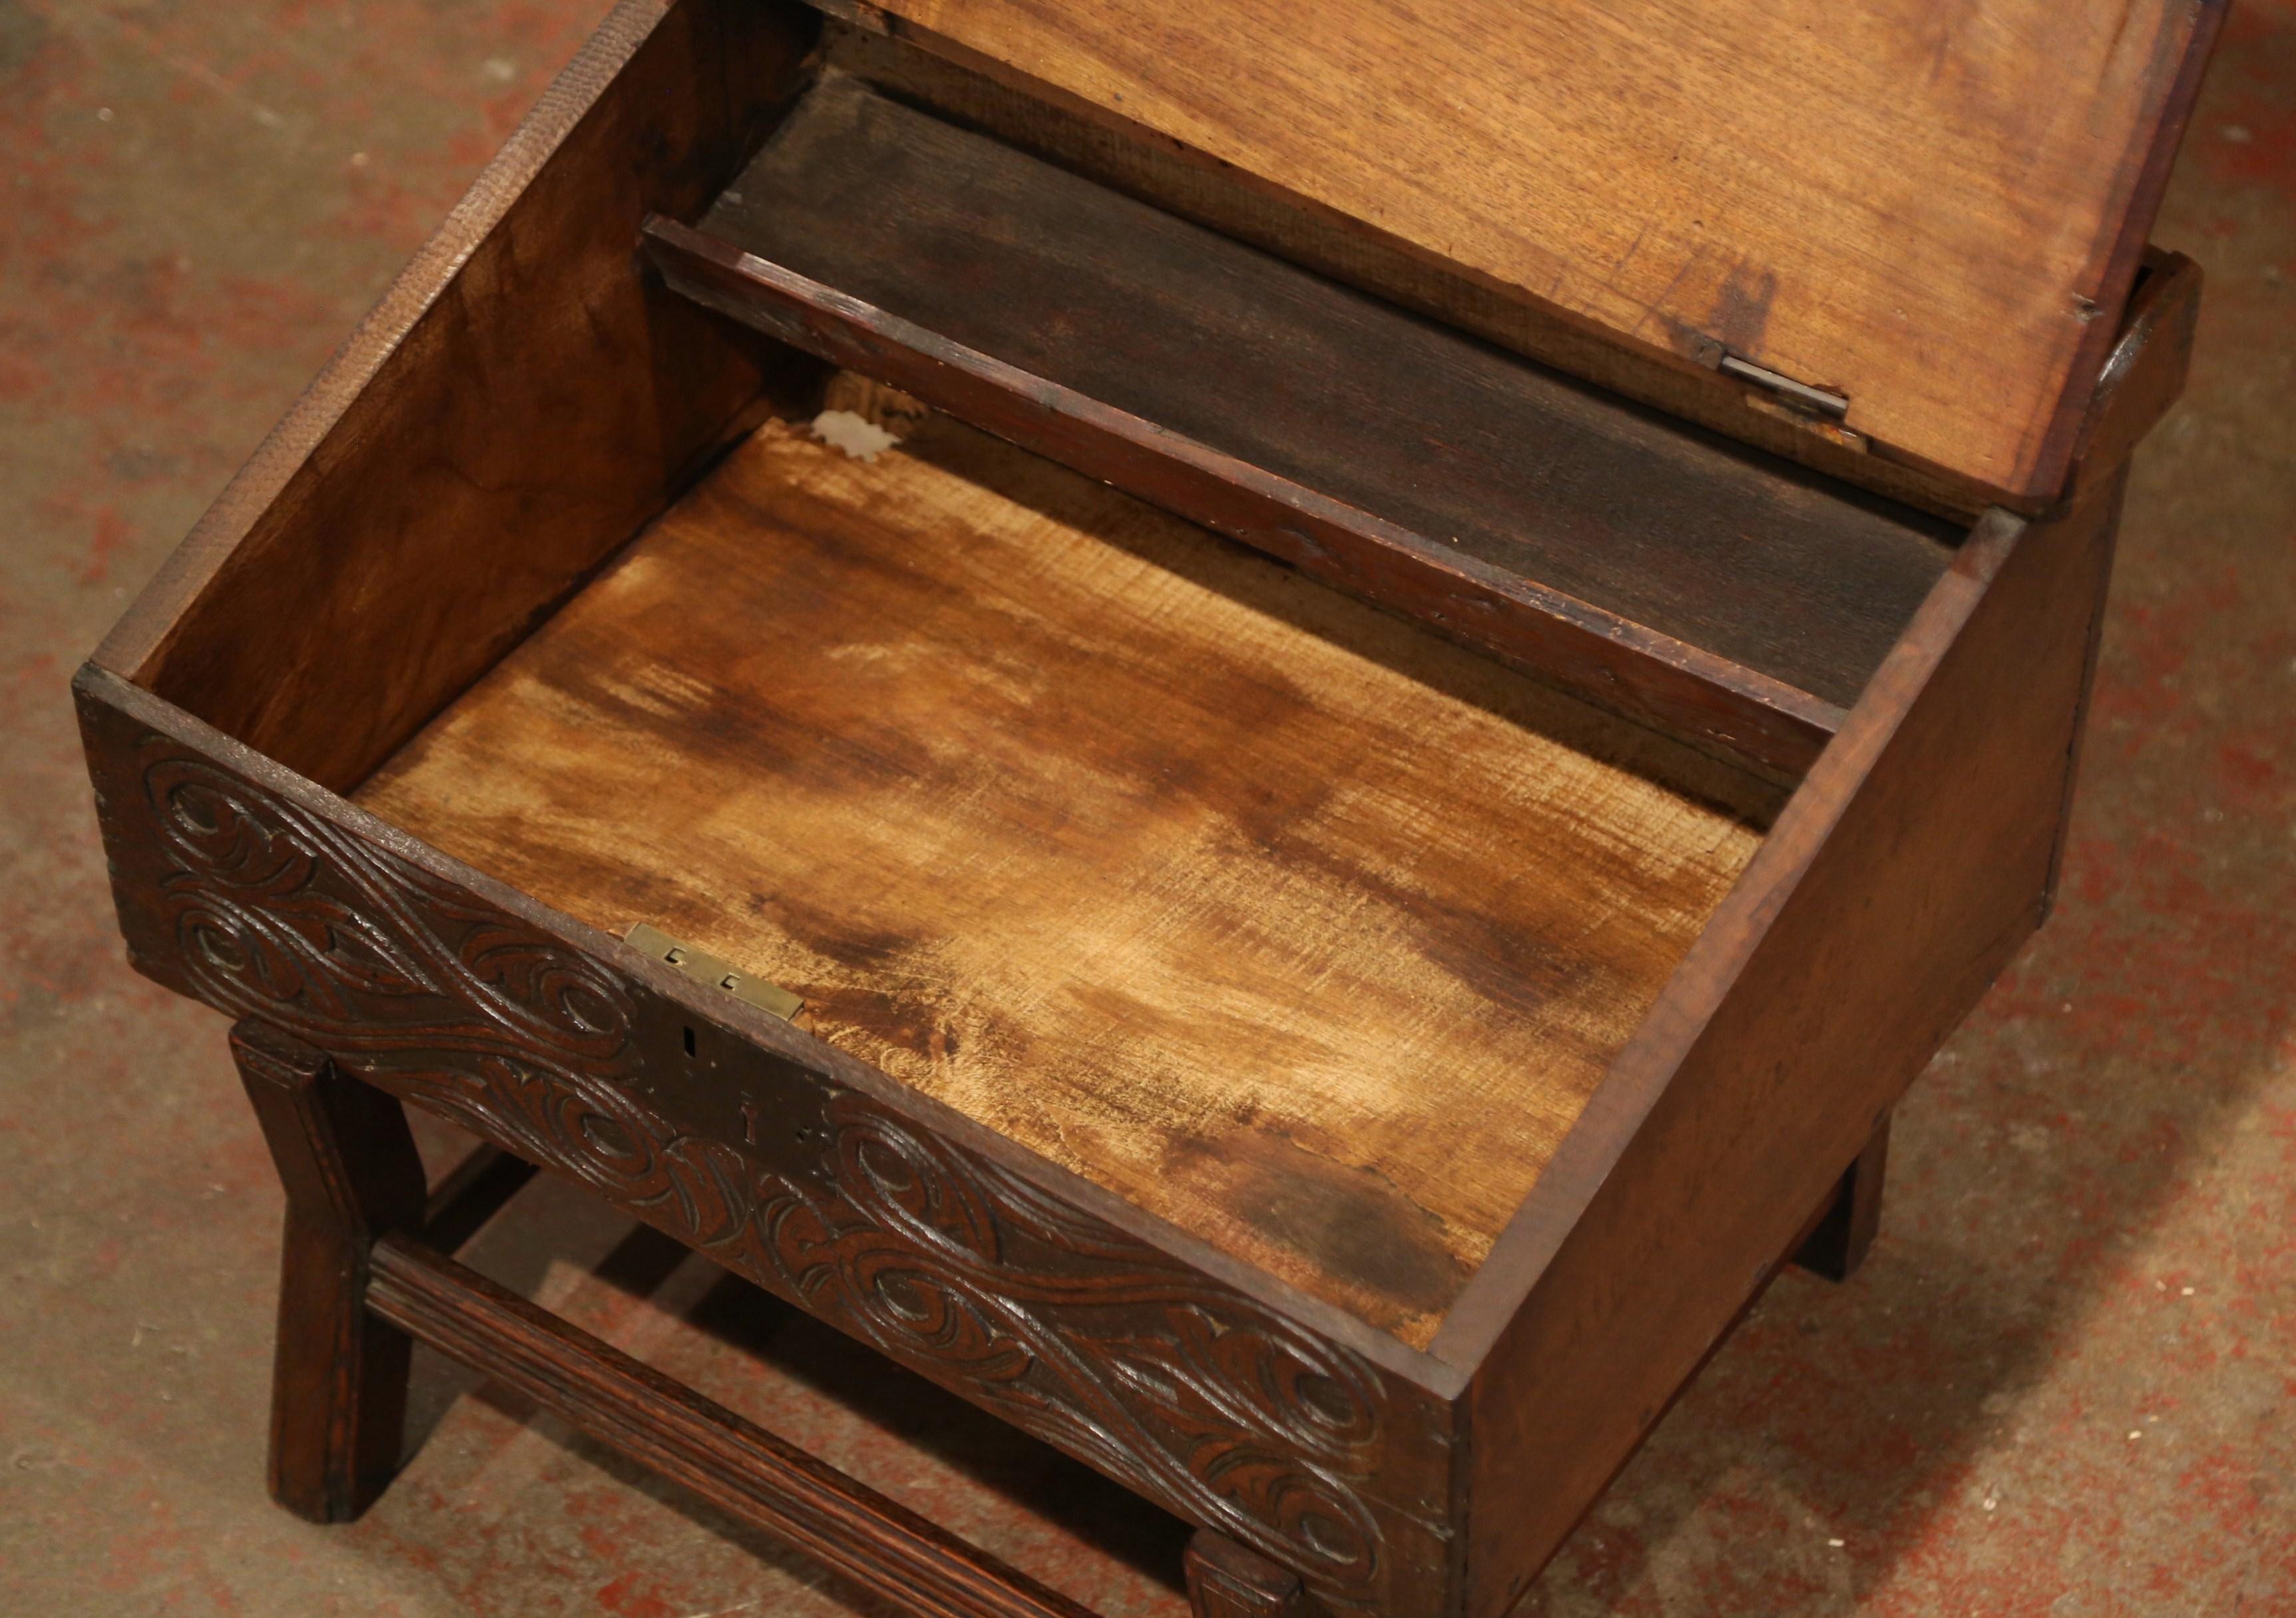 18th Century French Carved Walnut Desk on Legs with Slant Top and Inside Storage For Sale 2